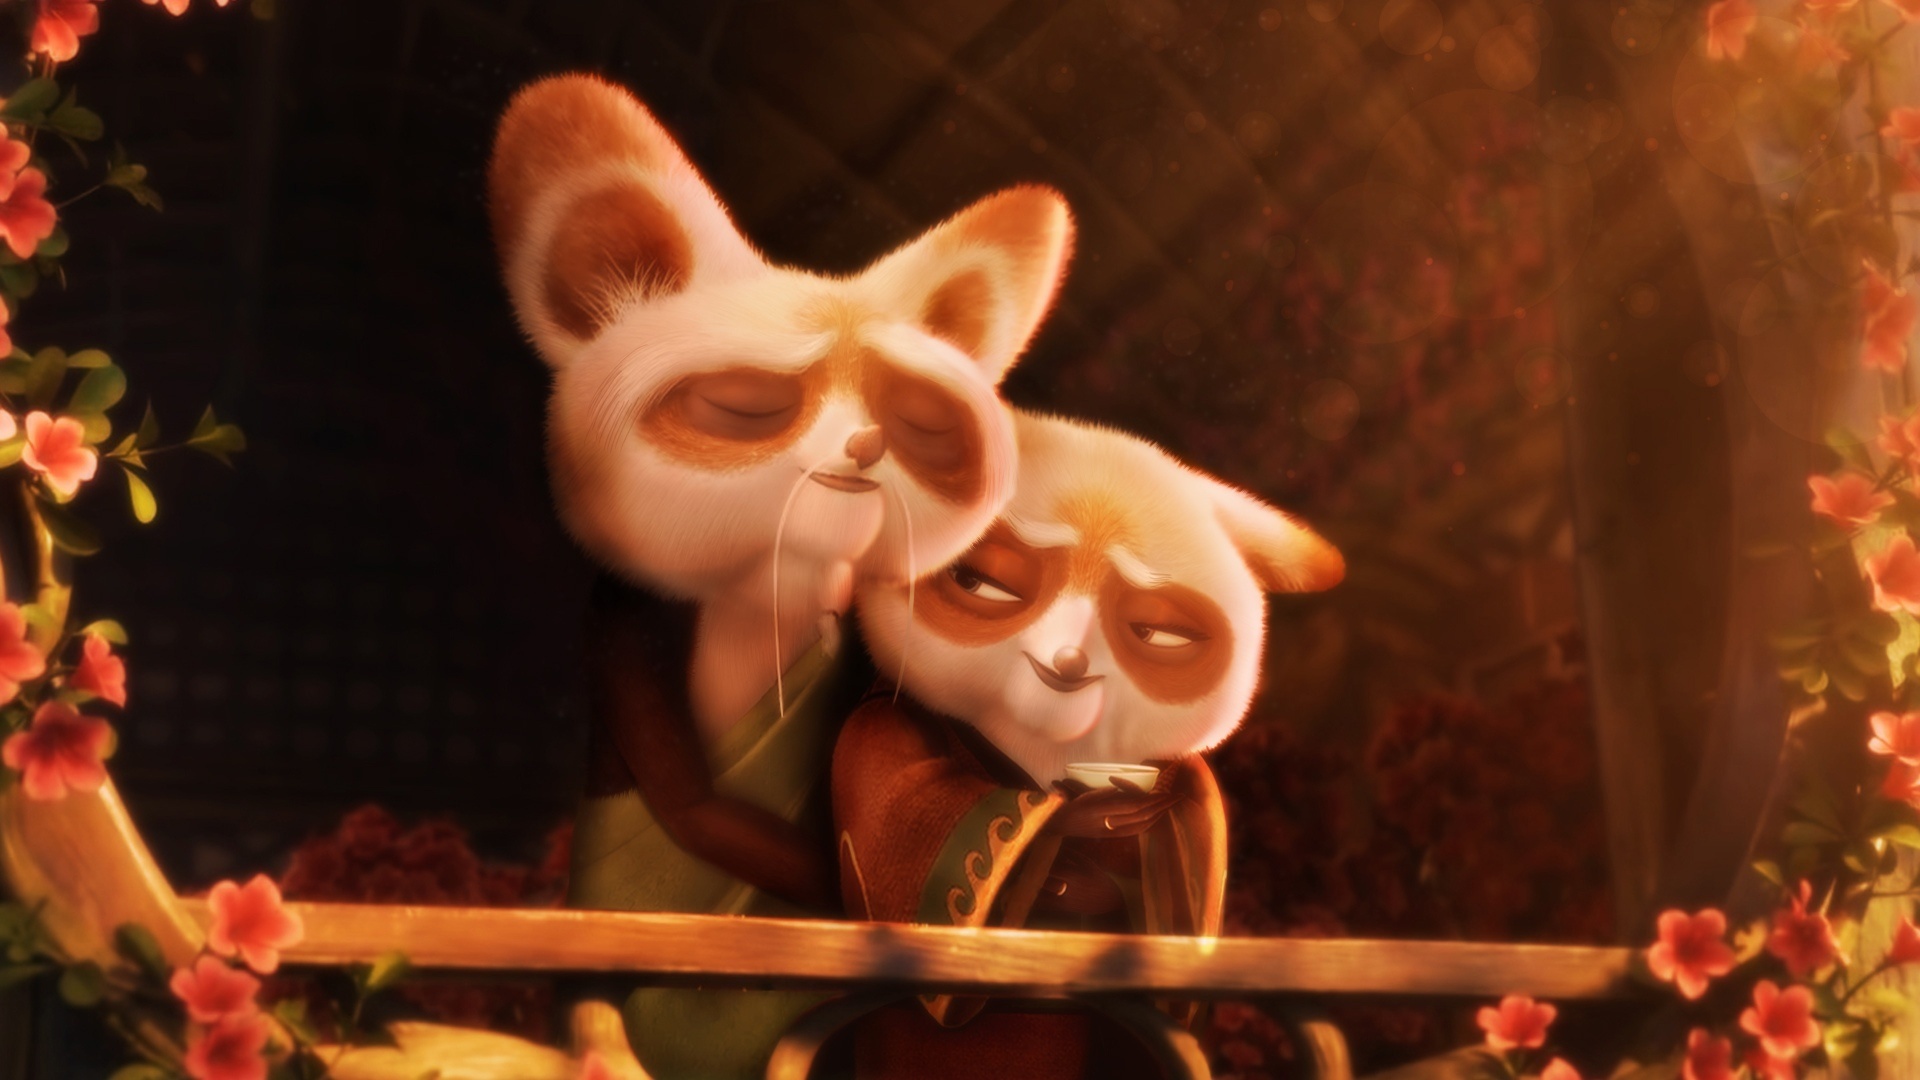 Master Shifu: The trainer of the Furious Five, Dragon Warrior, and Tai Lung. 1920x1080 Full HD Background.